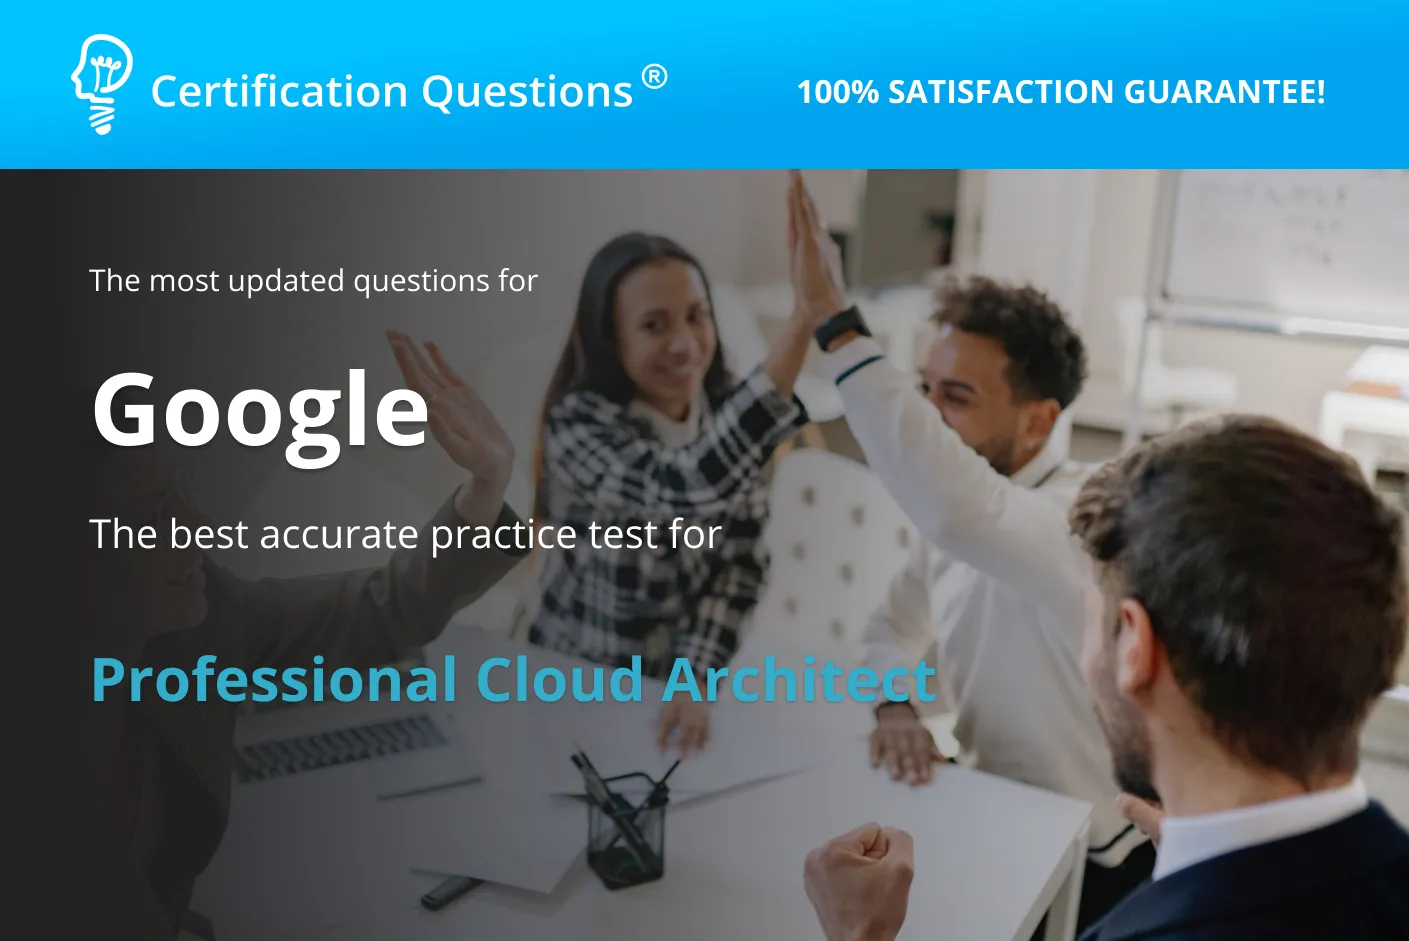 This image represents the Google Cloud certified Architect Professional practice test